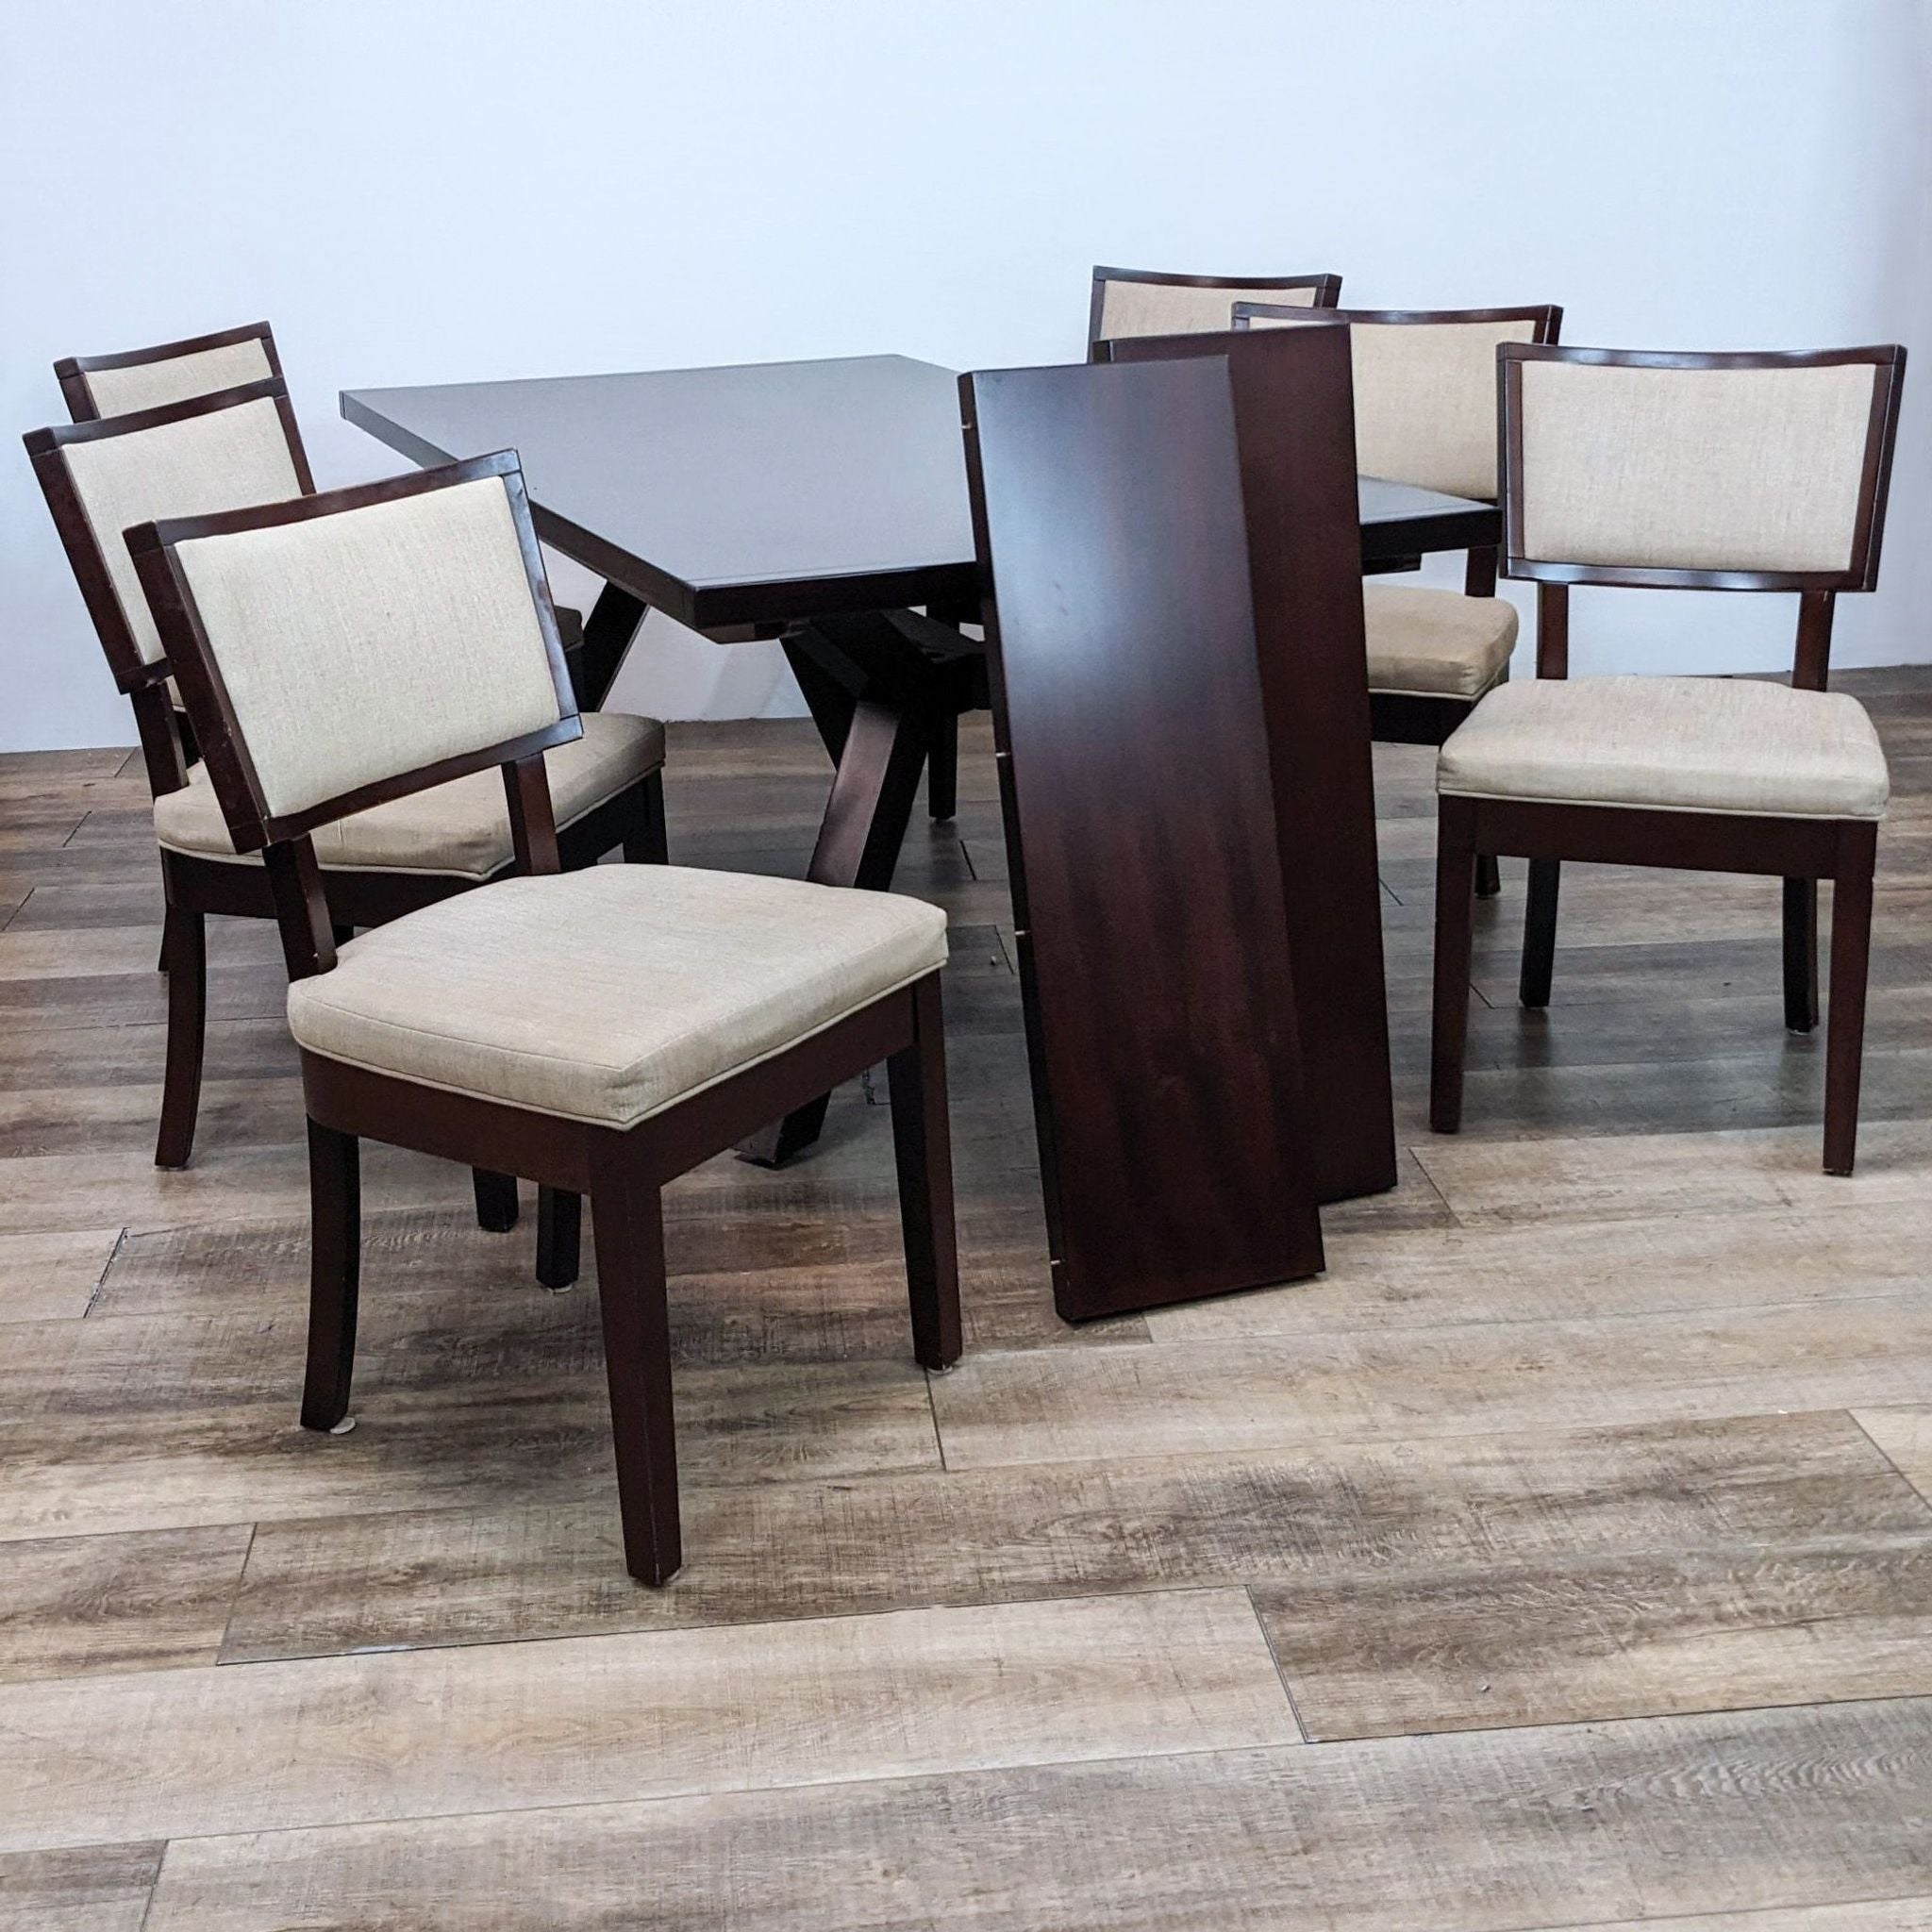 Alt text 1: Modern 7-piece Sitcom dining set with a dark wood table and six chairs with neutral fabric upholstery on a wooden floor.